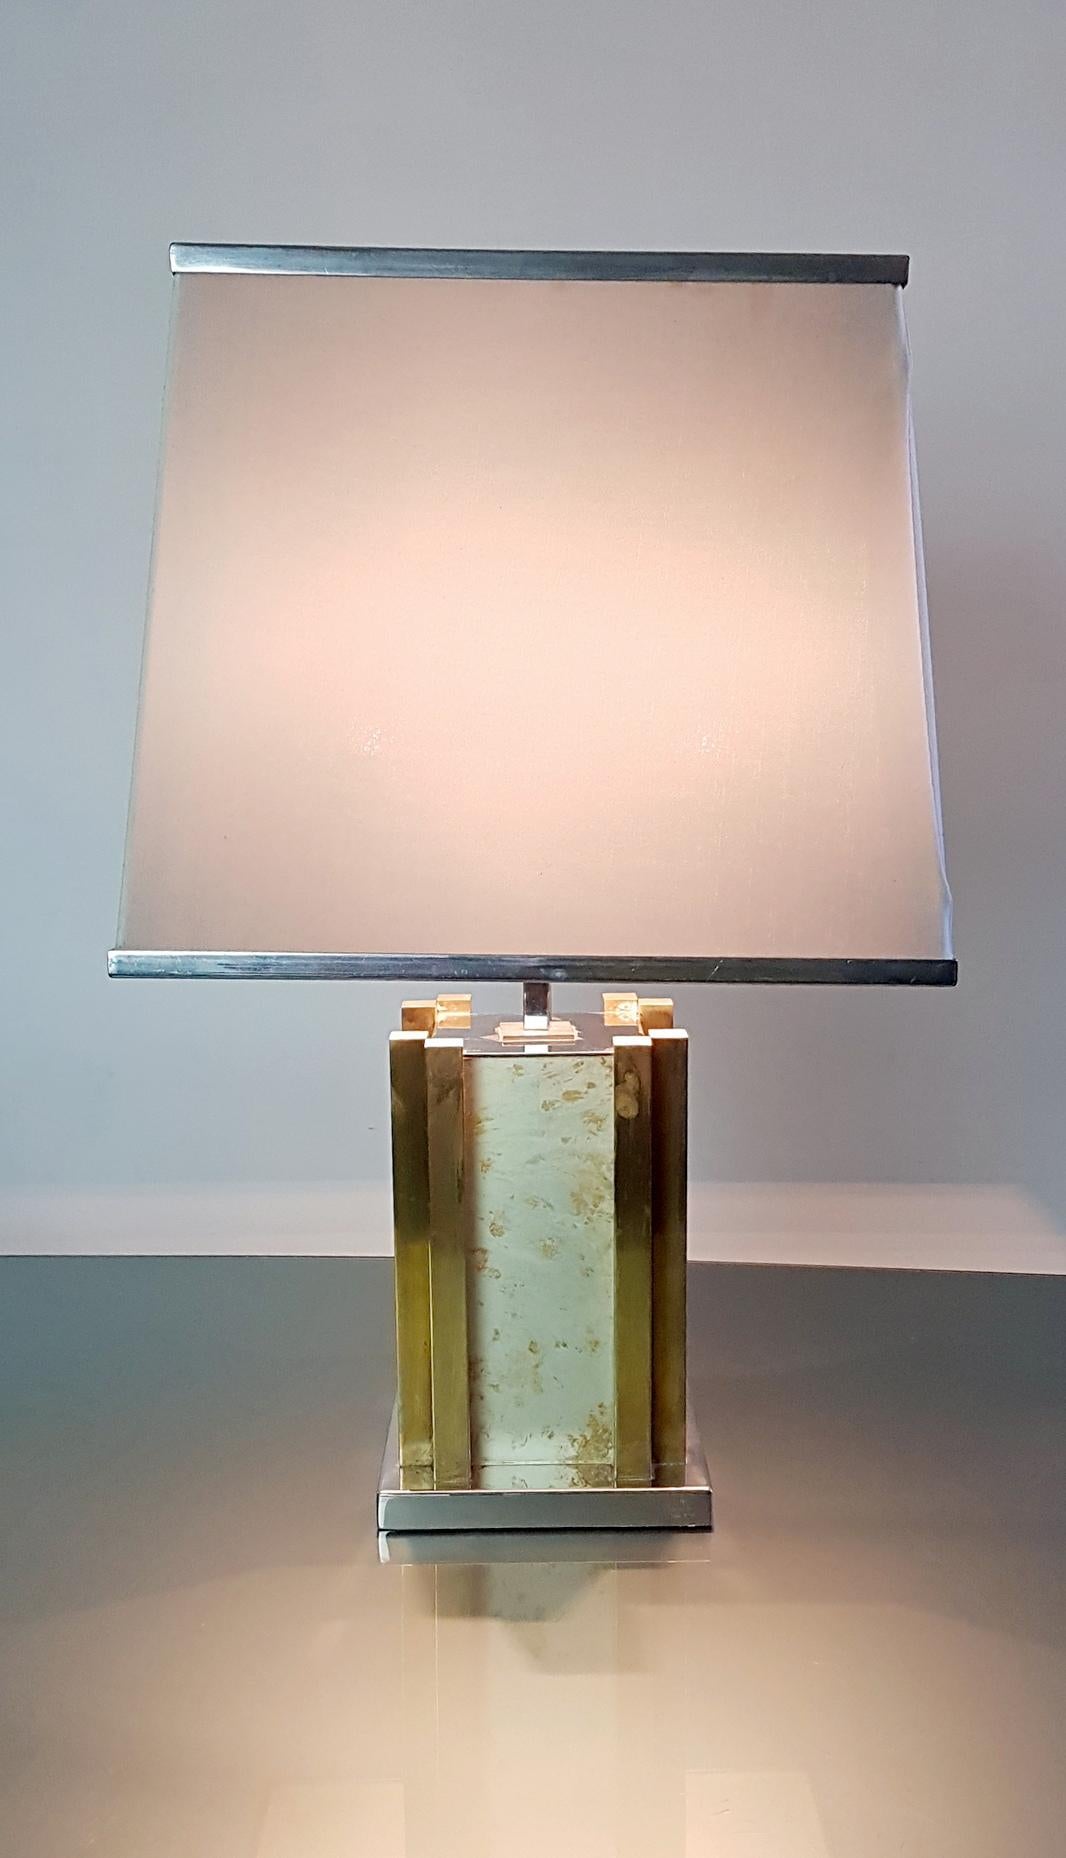 A signed table lamp by Romeo Rega with a chrome and brass base and faux stone sides. Original lampshade in white fabric and chrome. Uses two E27 lightbulbs. In very nice condition.